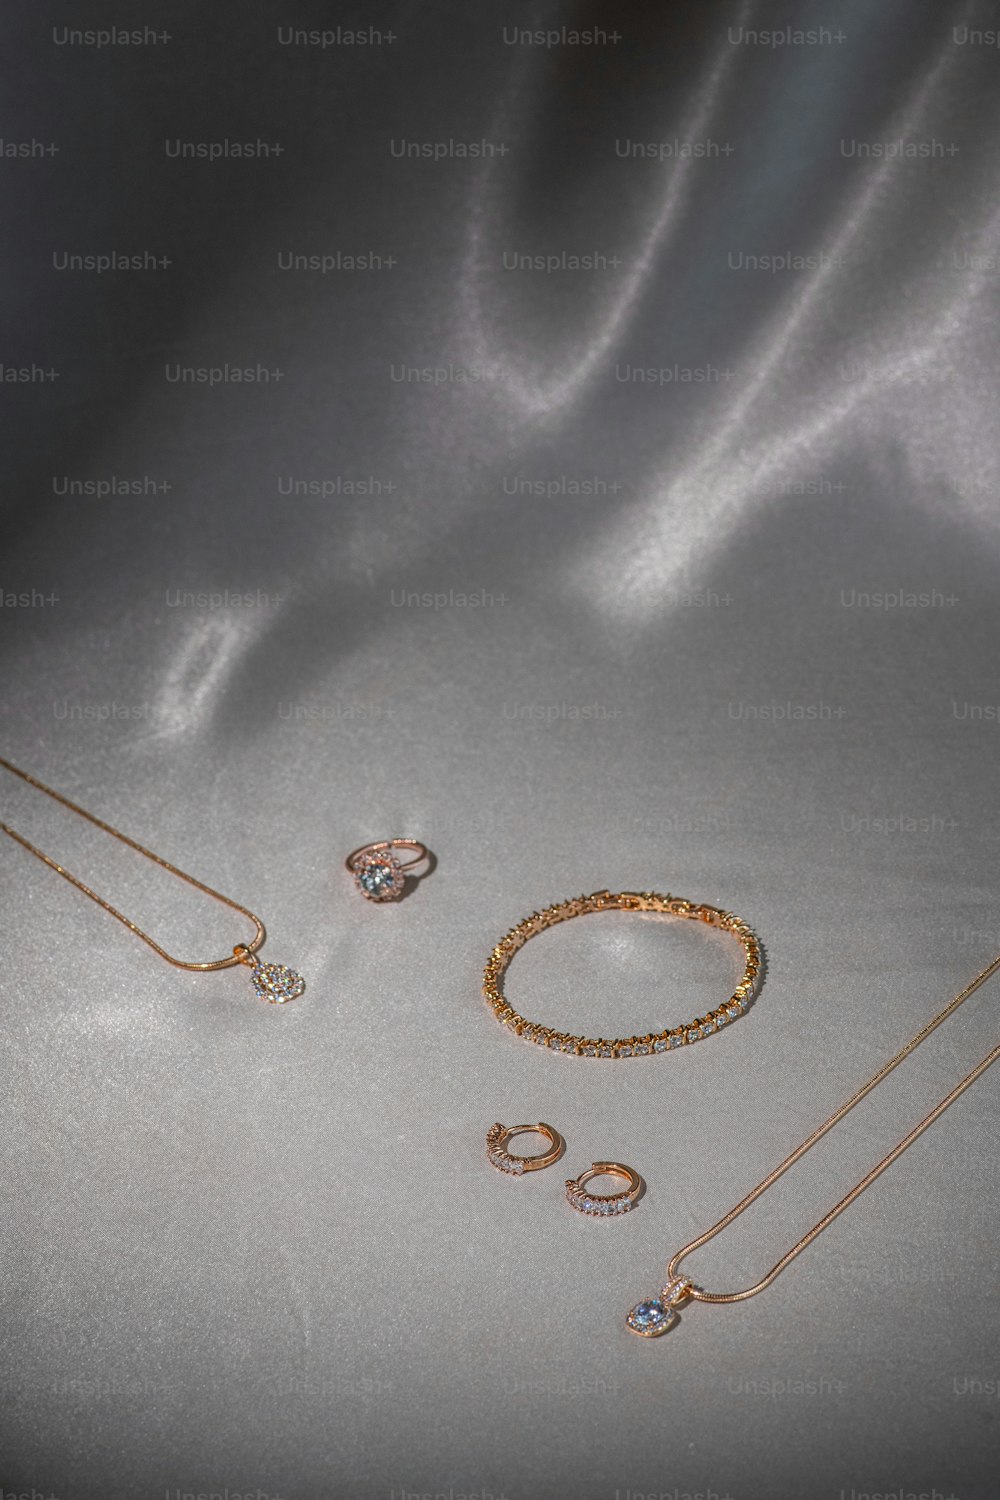 a collection of jewelry on a shiny surface